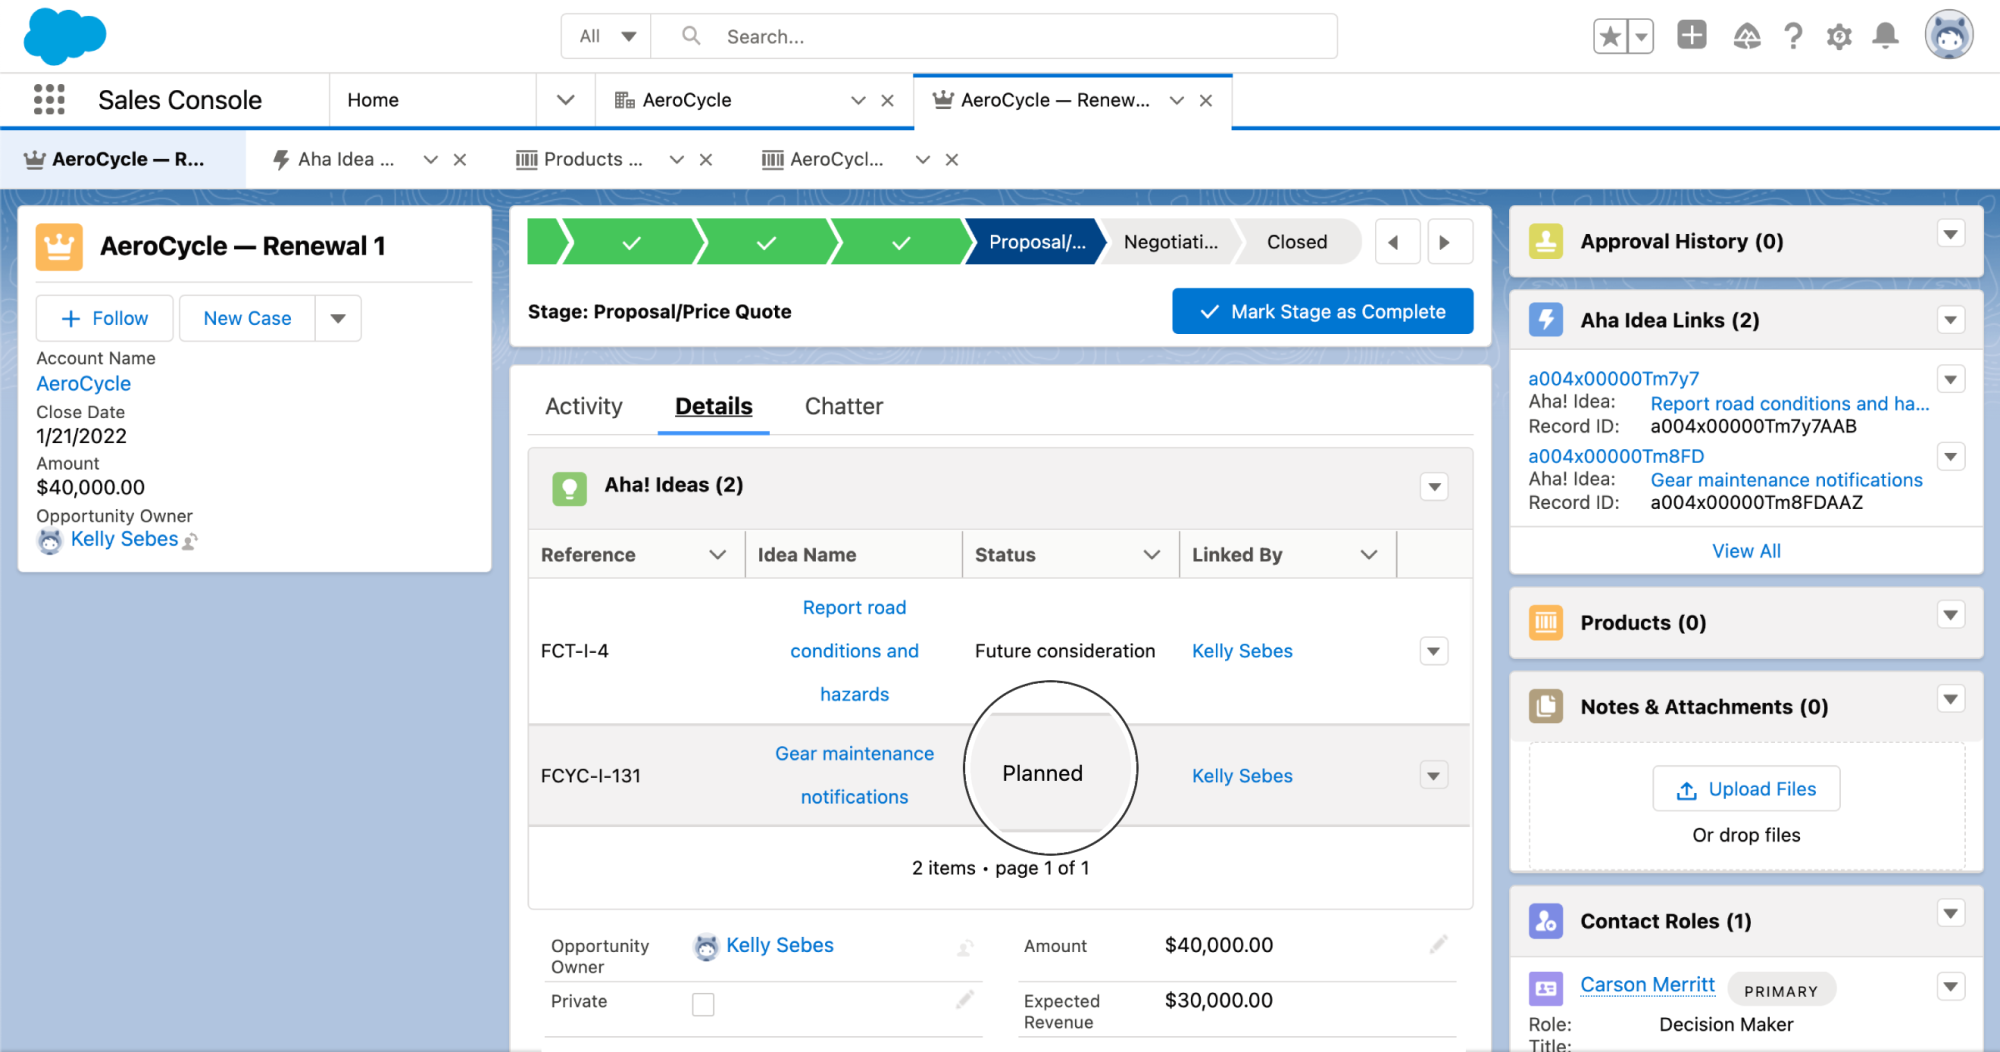 Any updates to the idea status in Aha! will immediately show up in Salesforce, too.